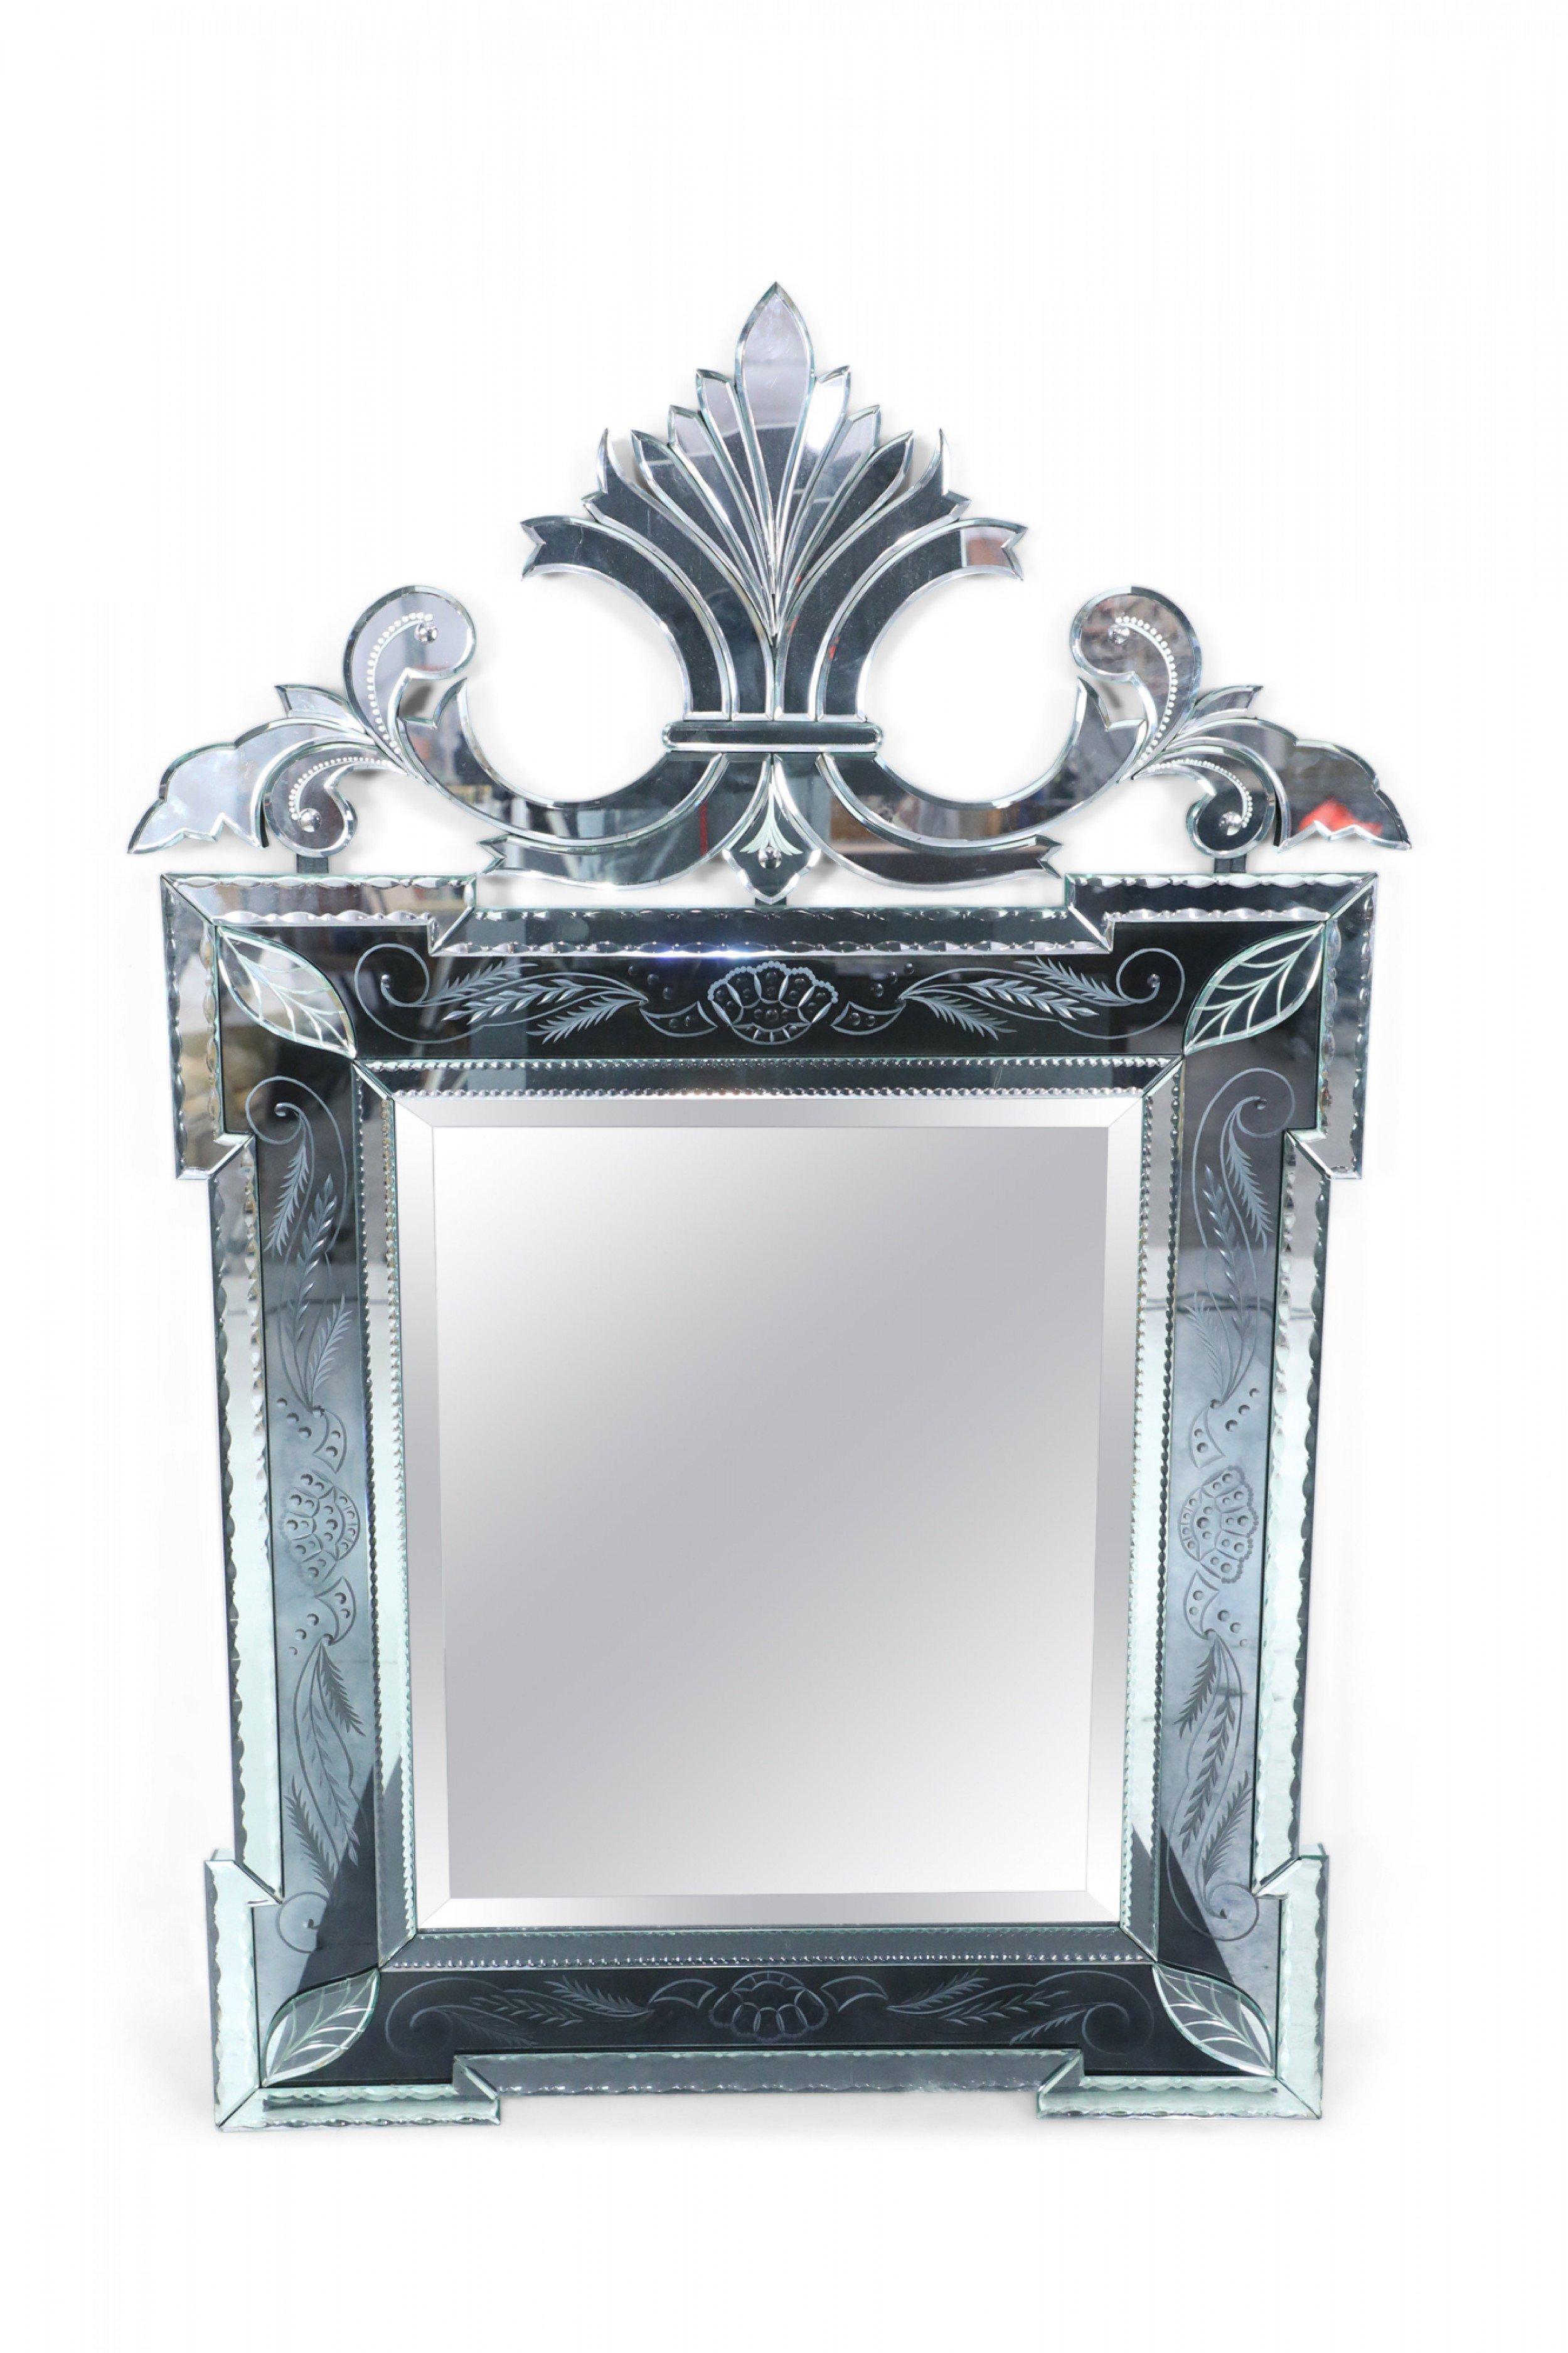 Italian Venetian-style (20th century) wall mirror with etched floral design panels and a double sided scroll pediment top.